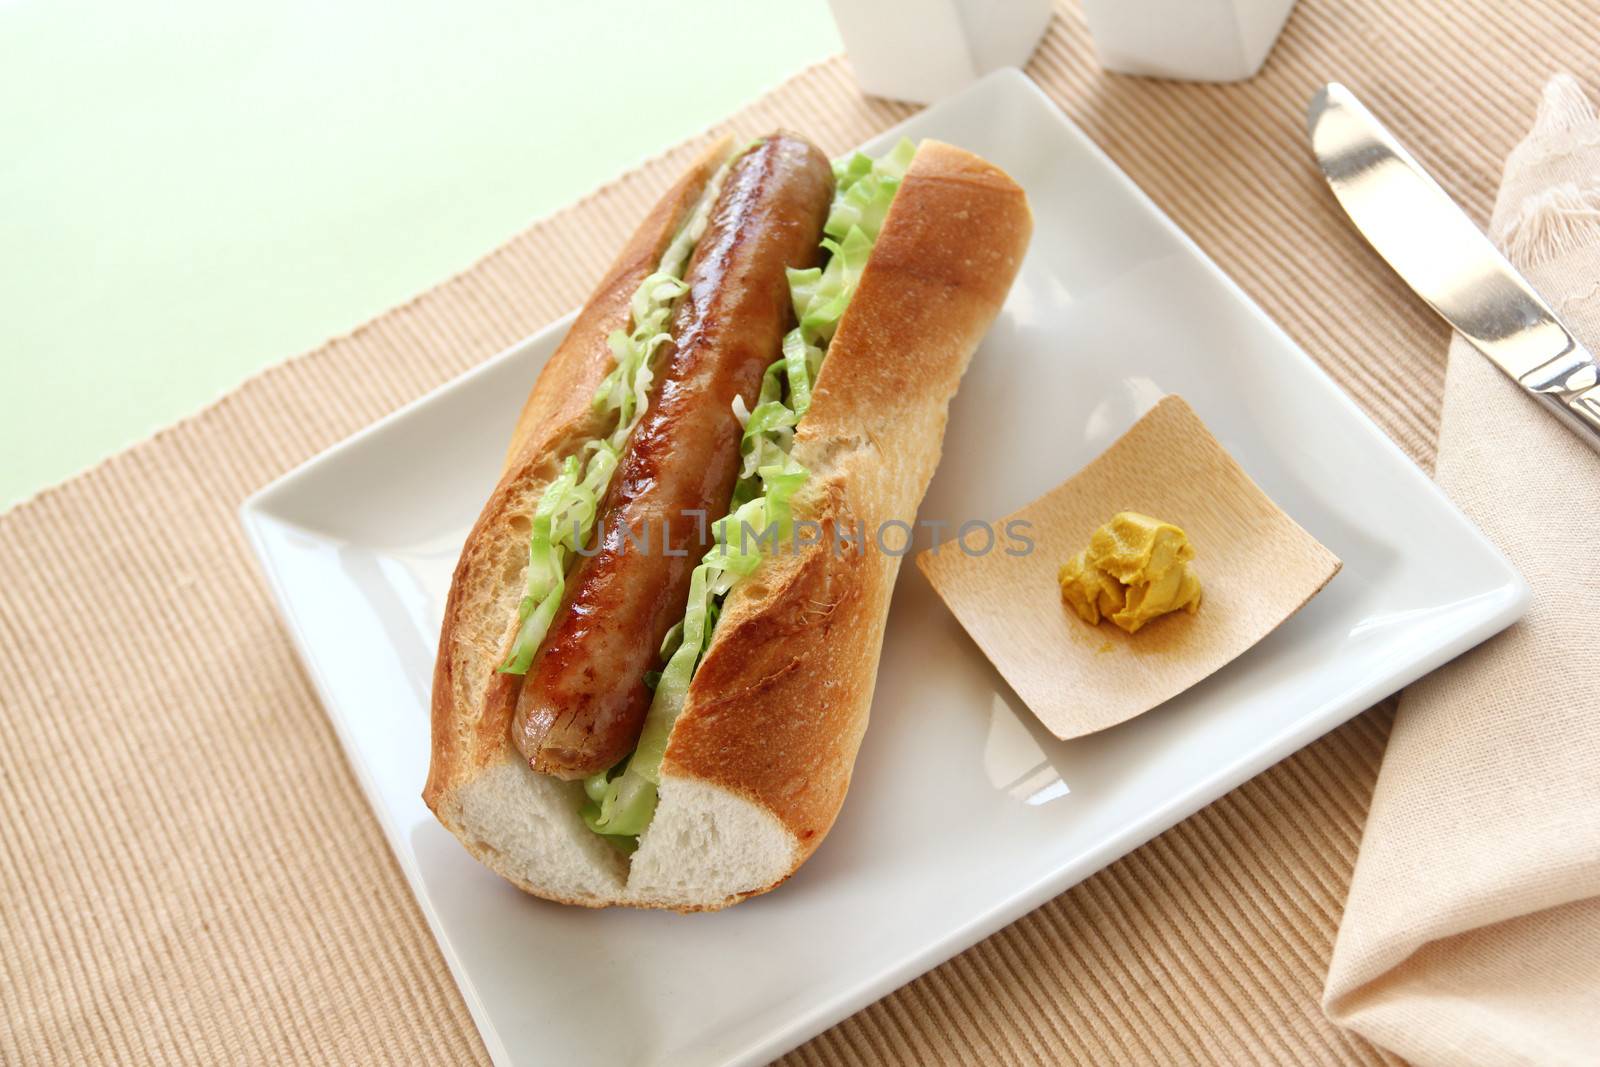 Delicious hot dog with a fried pork sausage with cabbage and hot mustard.